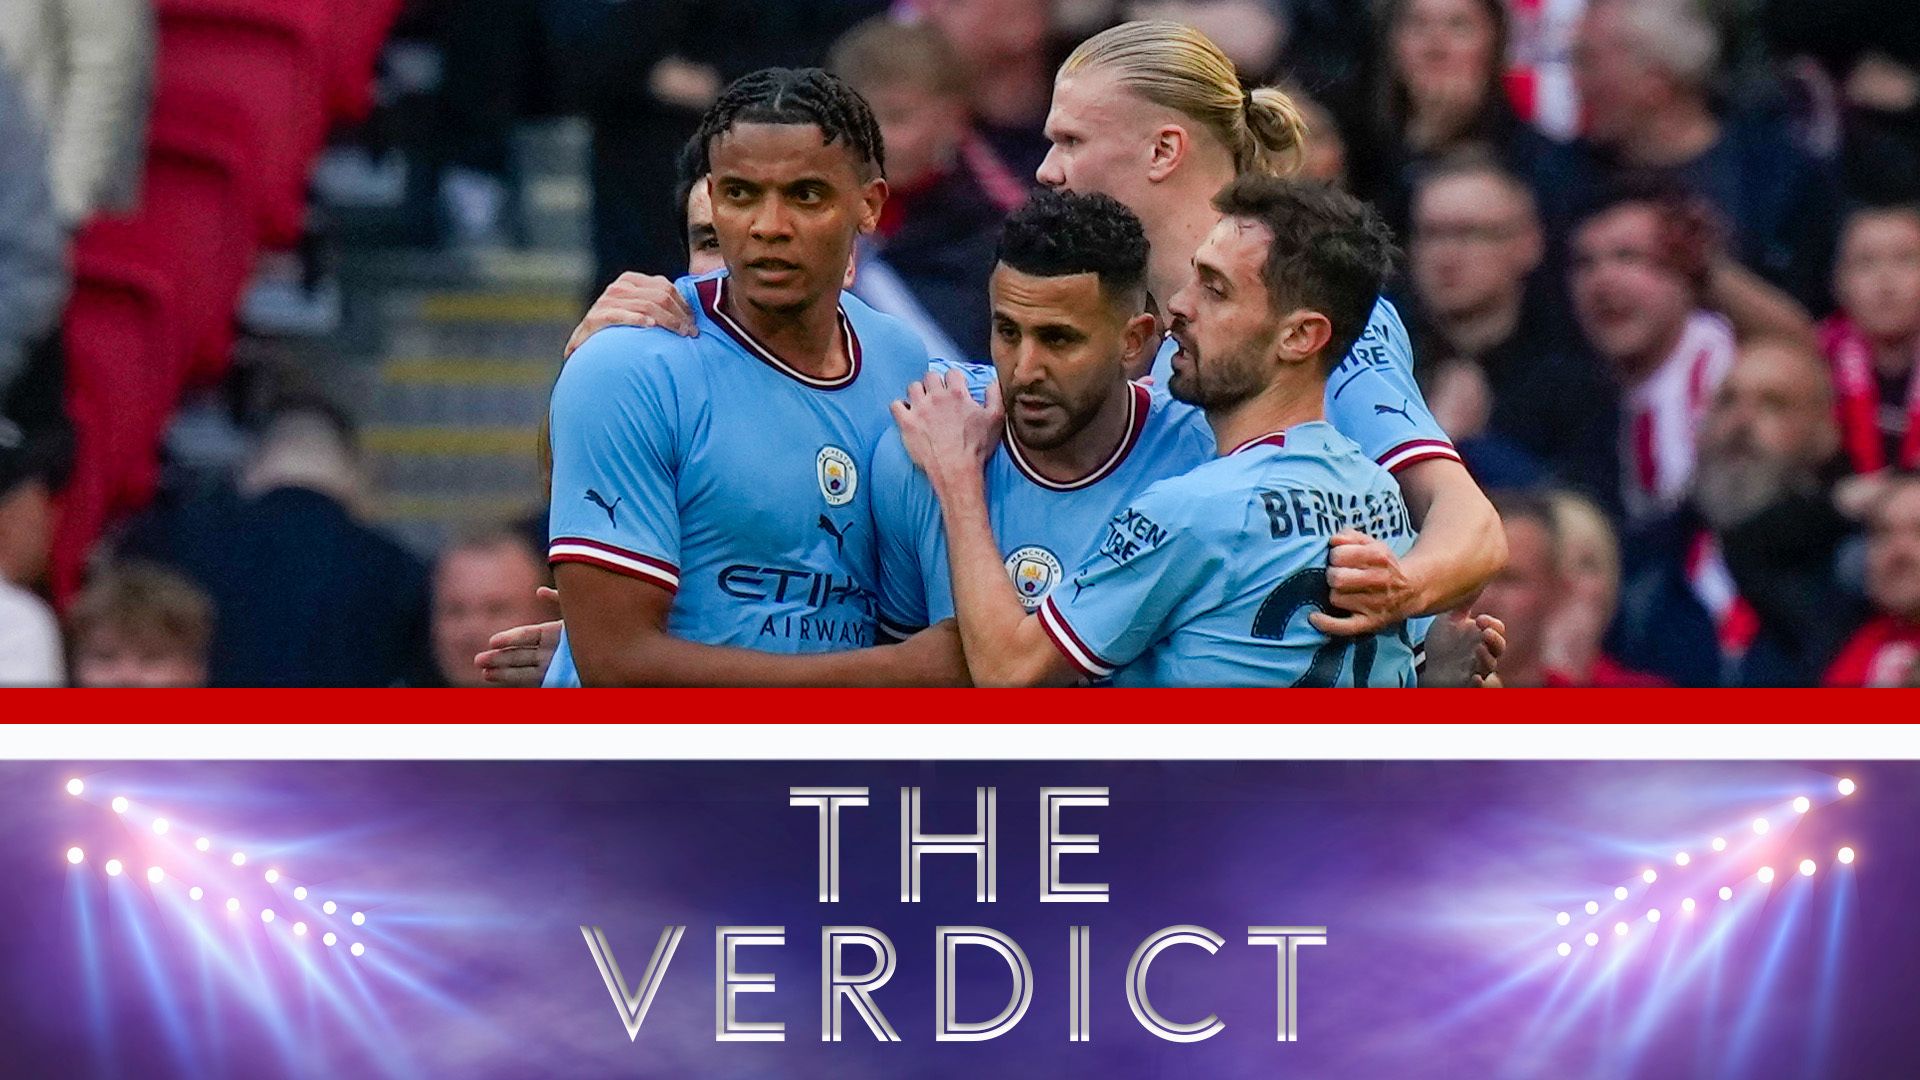 Man City into FA Cup final: Is the treble on? Can Arsenal stop them?